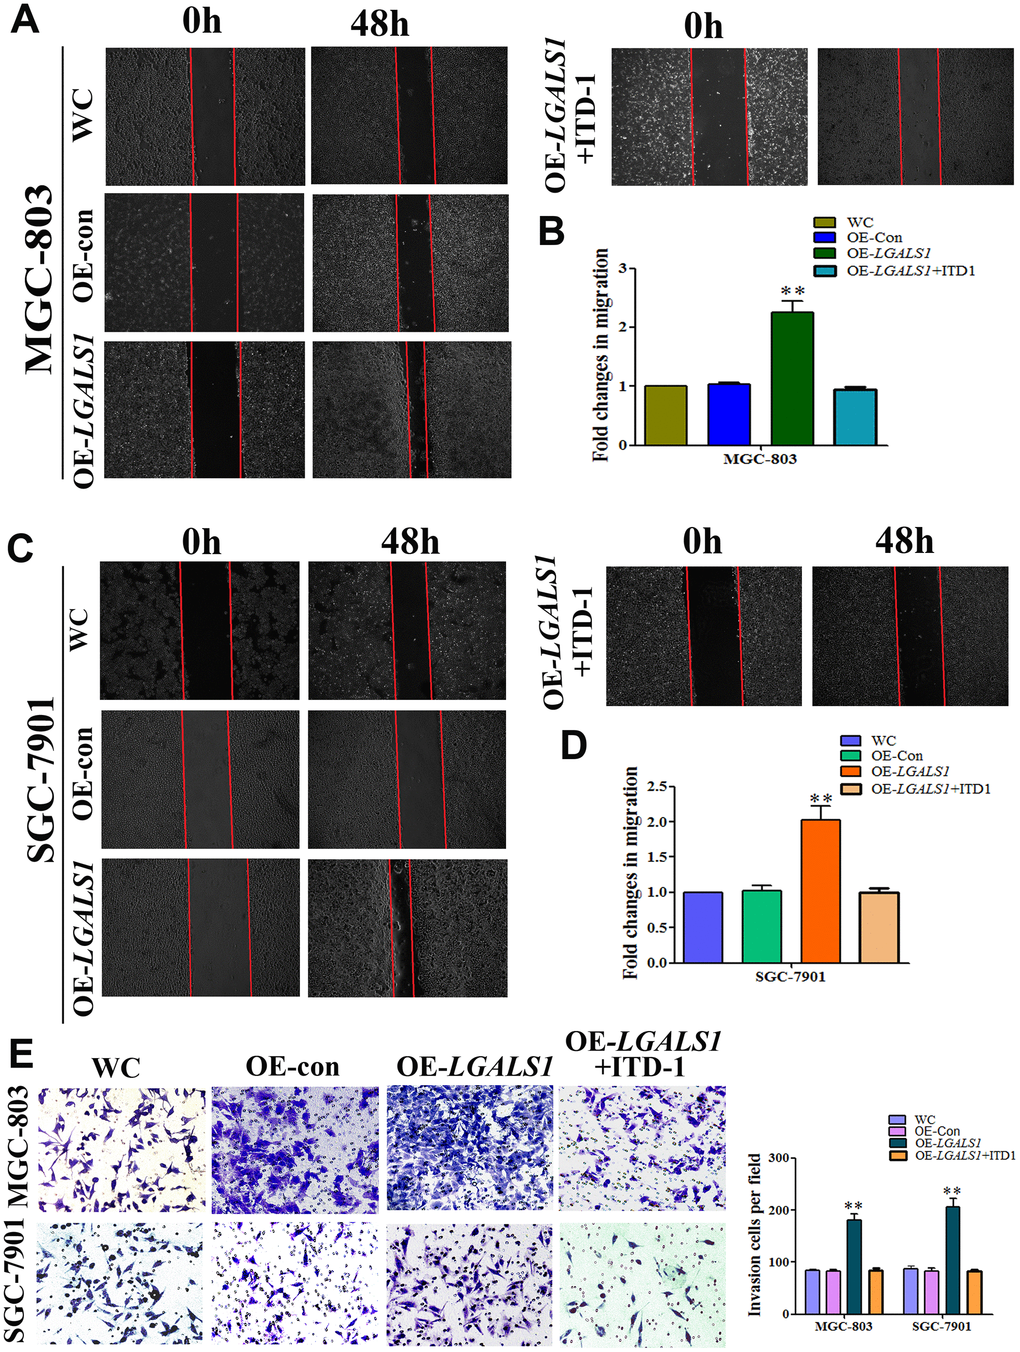 GAL-1/ LGALS1 promotes the migration and invasion of GC cells in vitro through TGF-β/Smad signaling pathways. (A–D) OE-LGALS1 significantly enhanced the migration capacity of MGC-803 and SGC-7901 cells compared with WC and OE-con. The migration capacity was abolished when the medium contained 10 μM ITD1 (P E) Transwell assay showing that MGC-803 and SGC-7901 cells increased their invasive ability after transfection with LV-LGALS1-OE, and 10μM ITD1 abolished this increase in invasive ability (n = 3). Magnification: ×200.